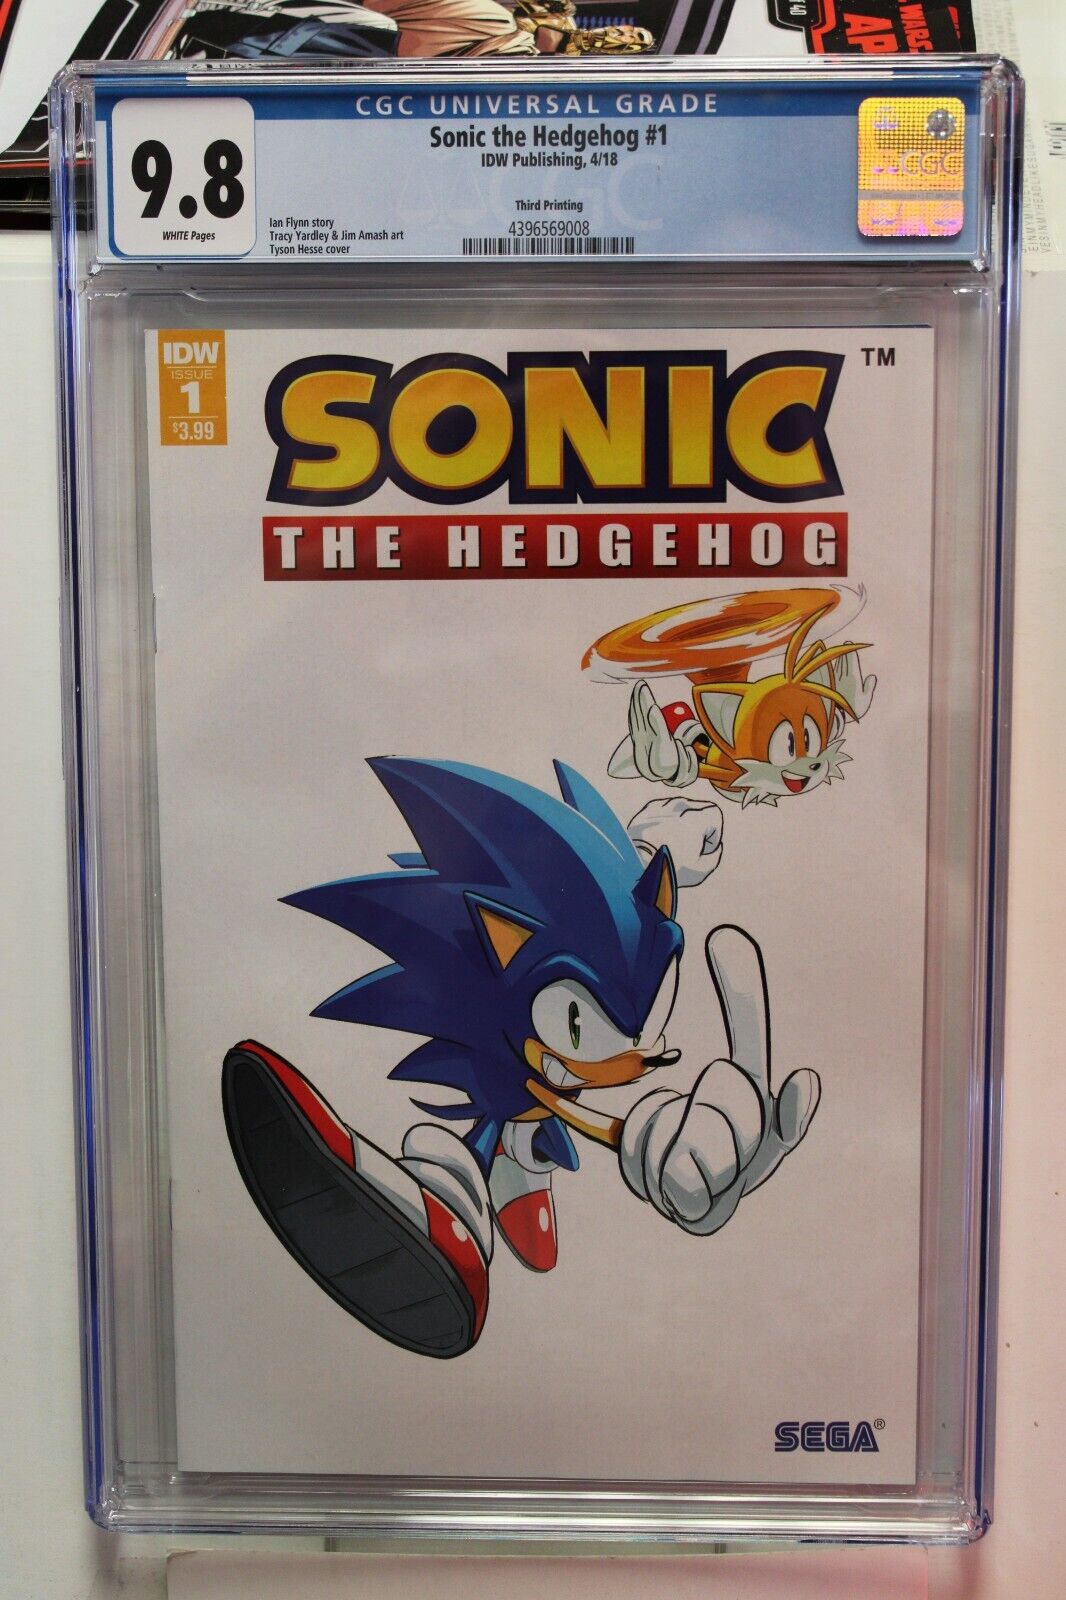 SONIC THE HEDGEHOG #1 CGC 9.8 WHITE 3rd Printing RARE (1 of only 3) IDW 2018